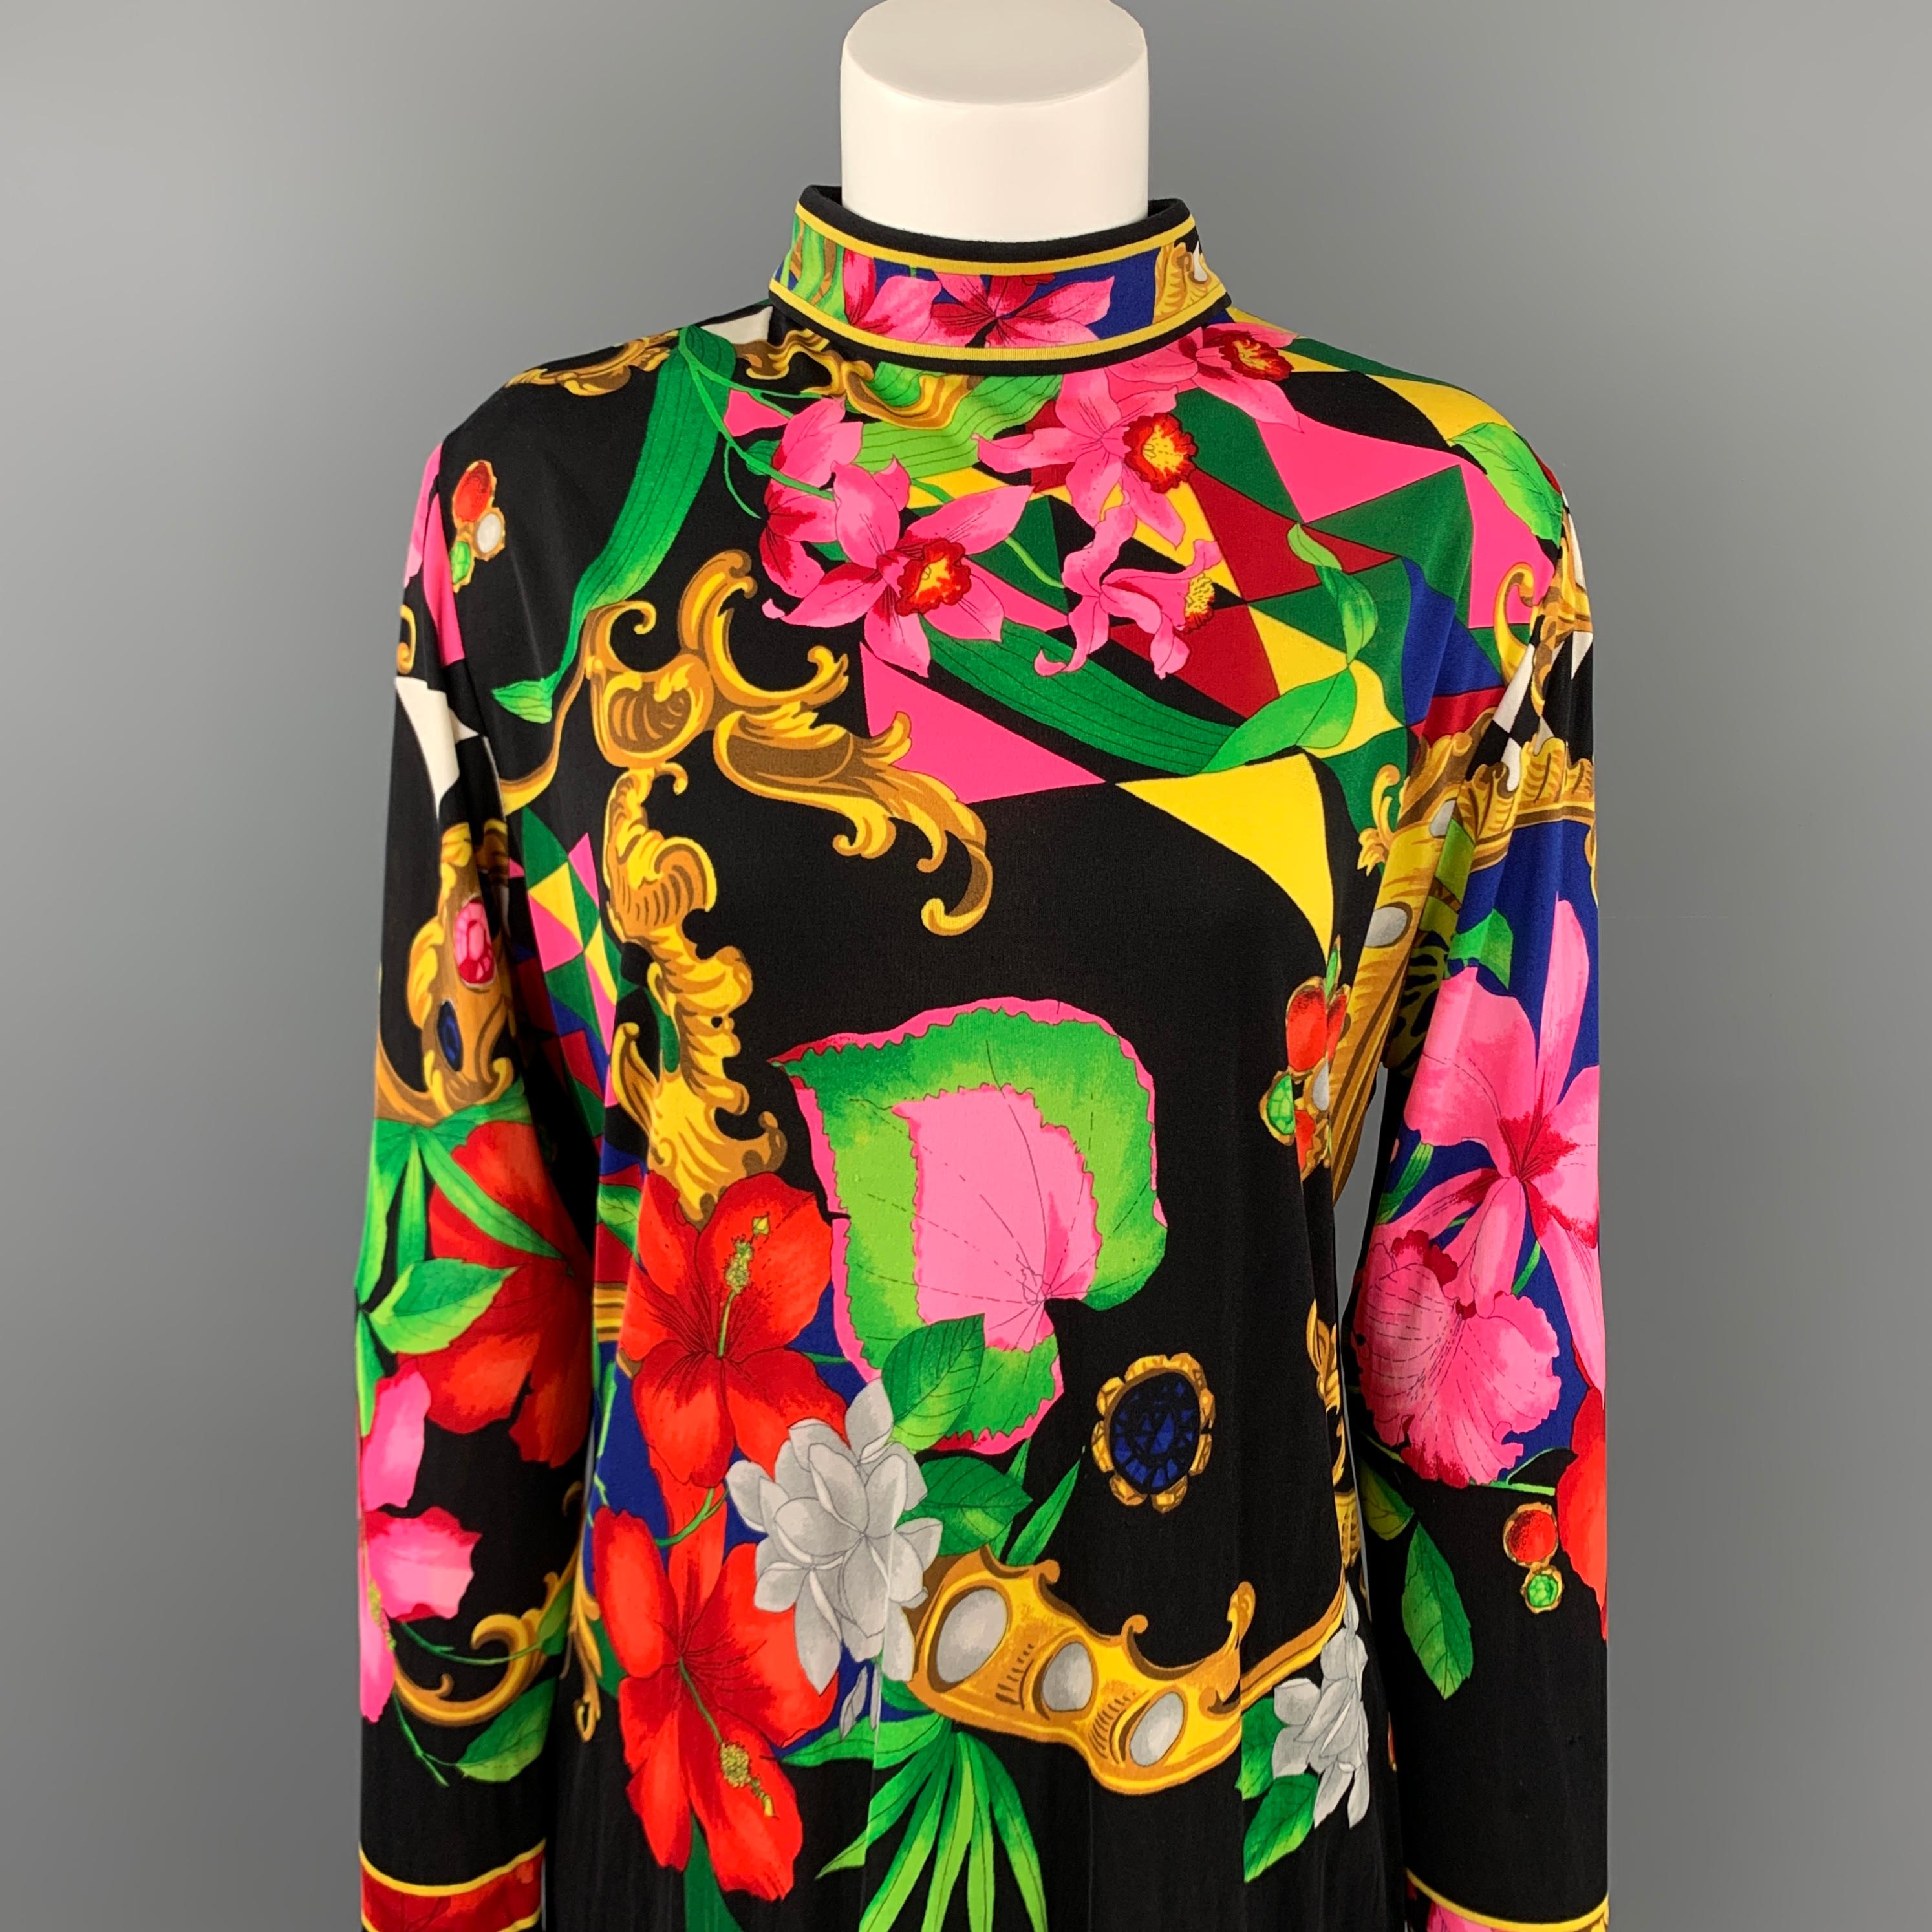 LEONARD blouse comes in a multi-color floral silk featuring a tunic style, long sleeves, and a back zip up closure. 

Very Good Pre-Owned Condition.
Marked: 3

Measurements:

Shoulder: 16.5 in. 
Bust: 42 in.
Sleeve: 27 in. 
Length: 29 in. 
